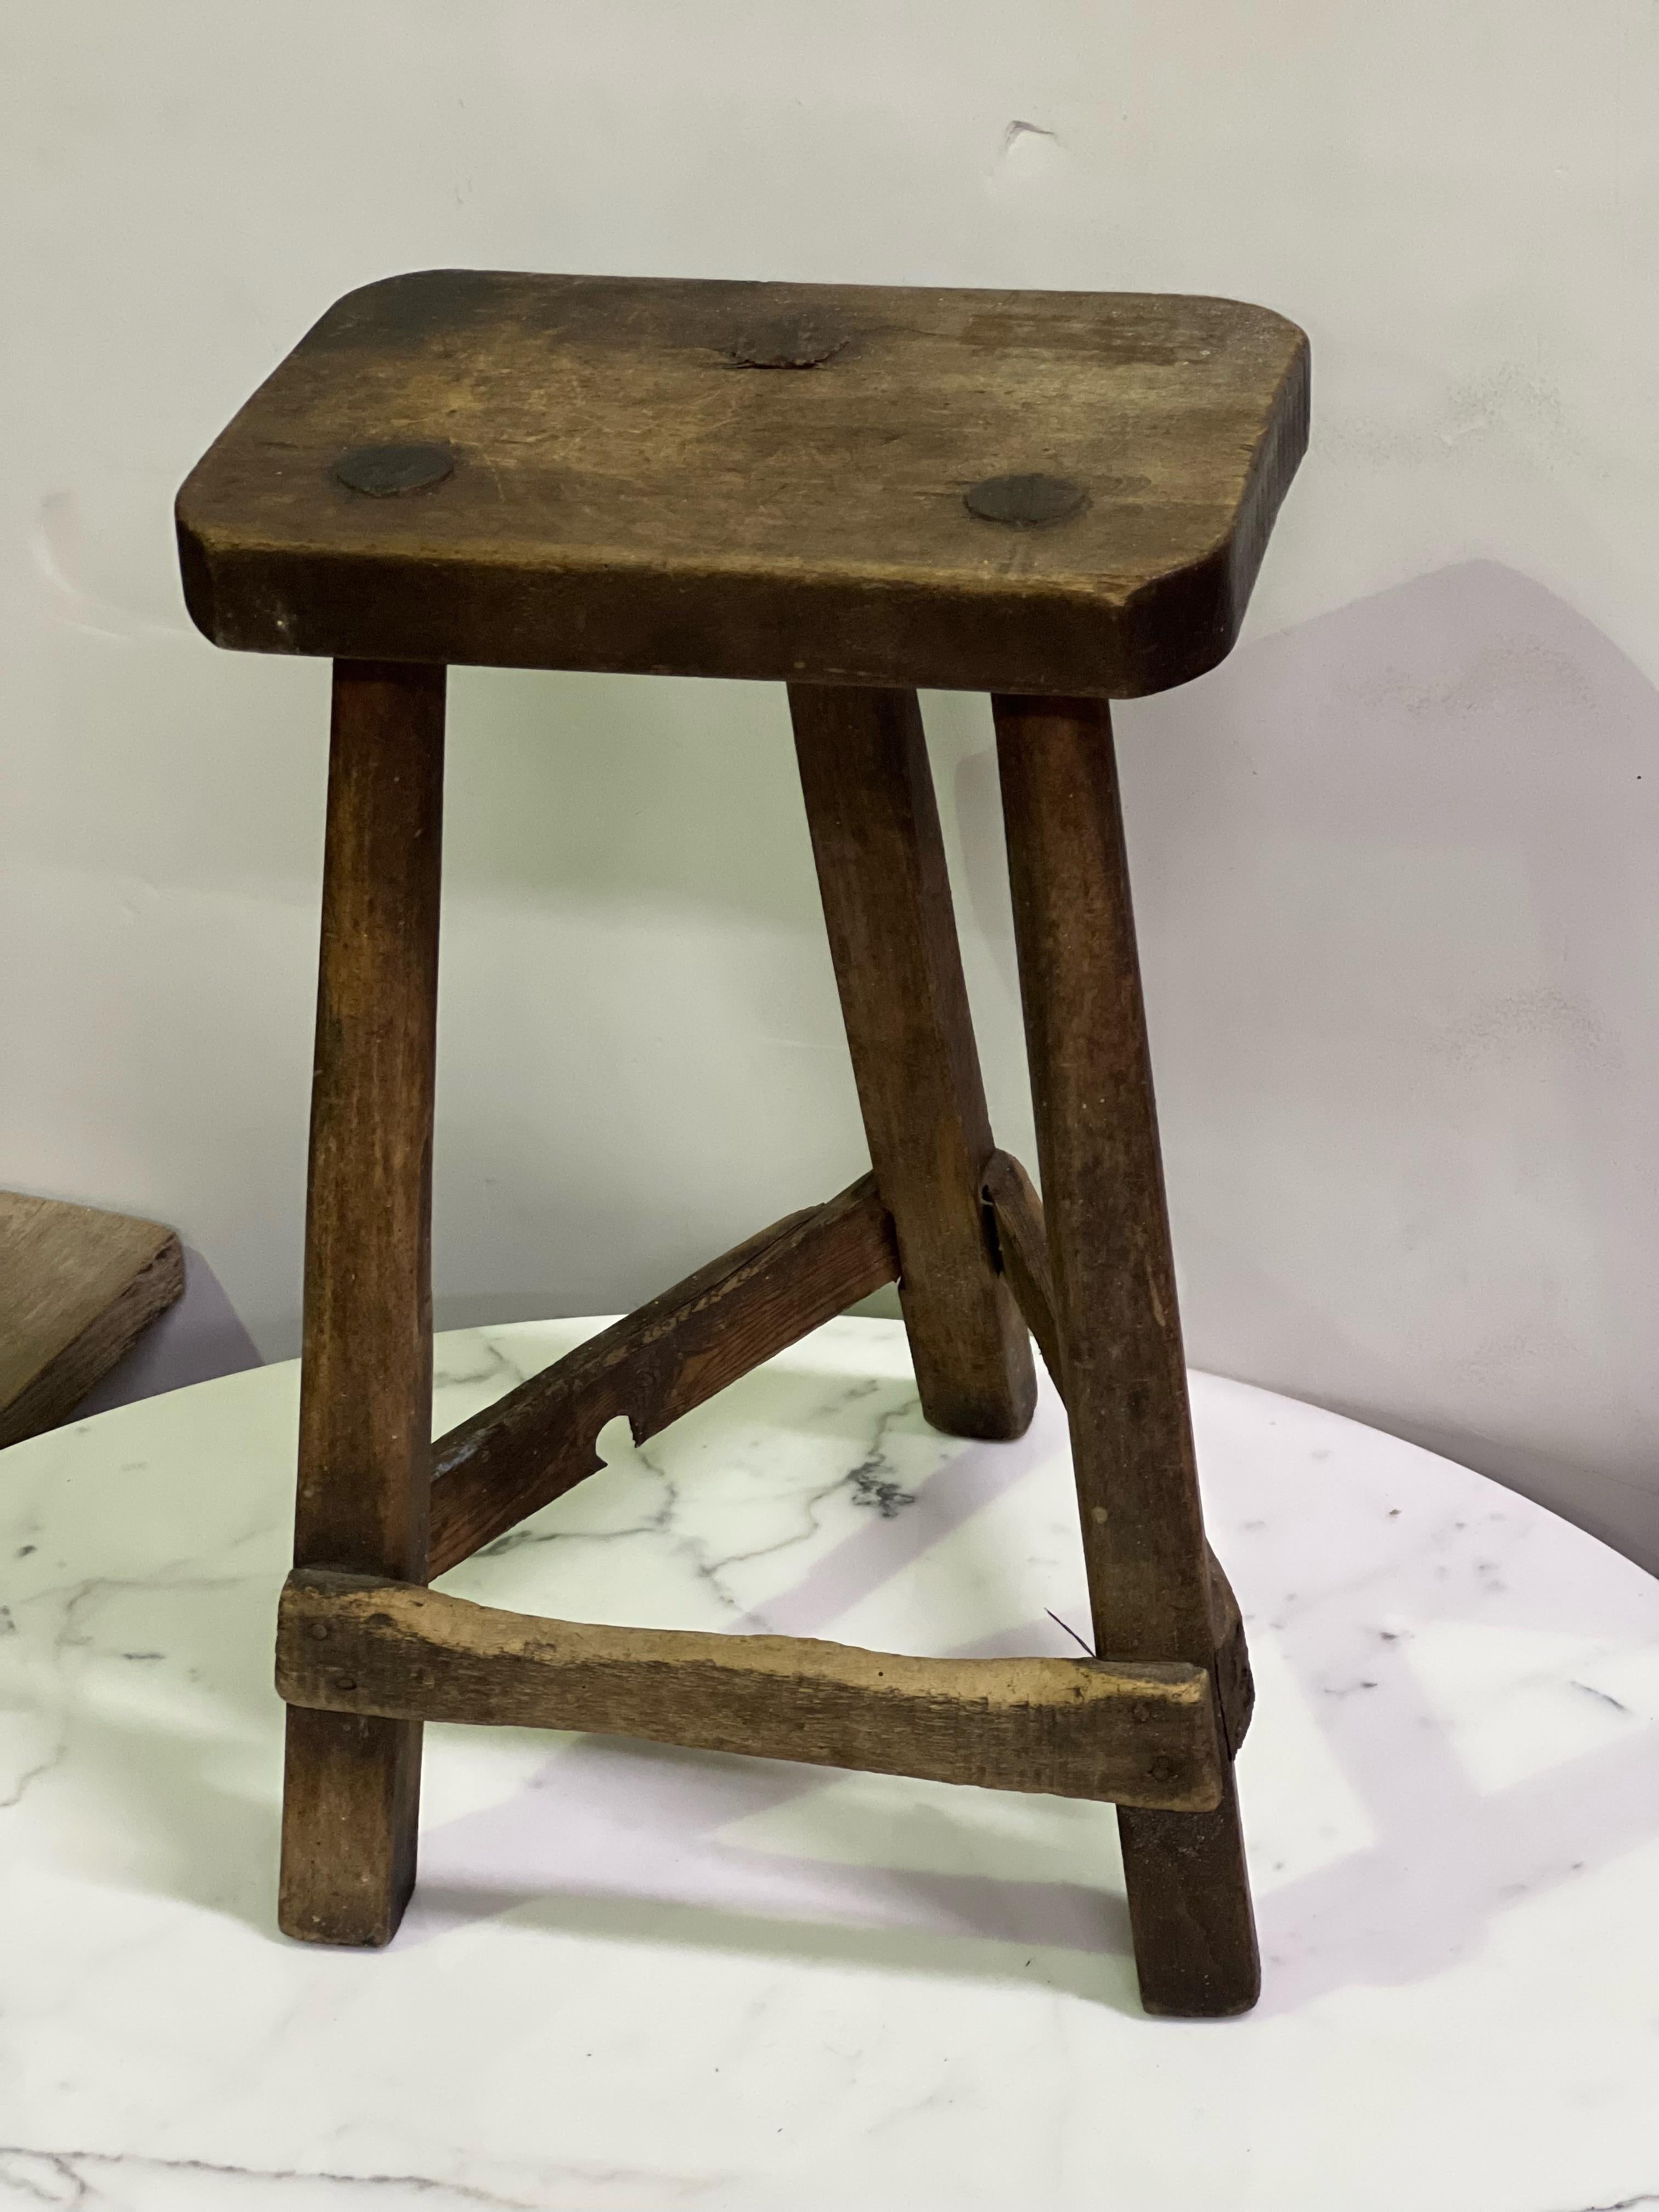 A beautiful Swedish folk art stool from the early 19th century. This stool has the original worn patina of time and use which can be noticed on the seat and the stretcher where the feet rested. The look and construction is very primitive but the